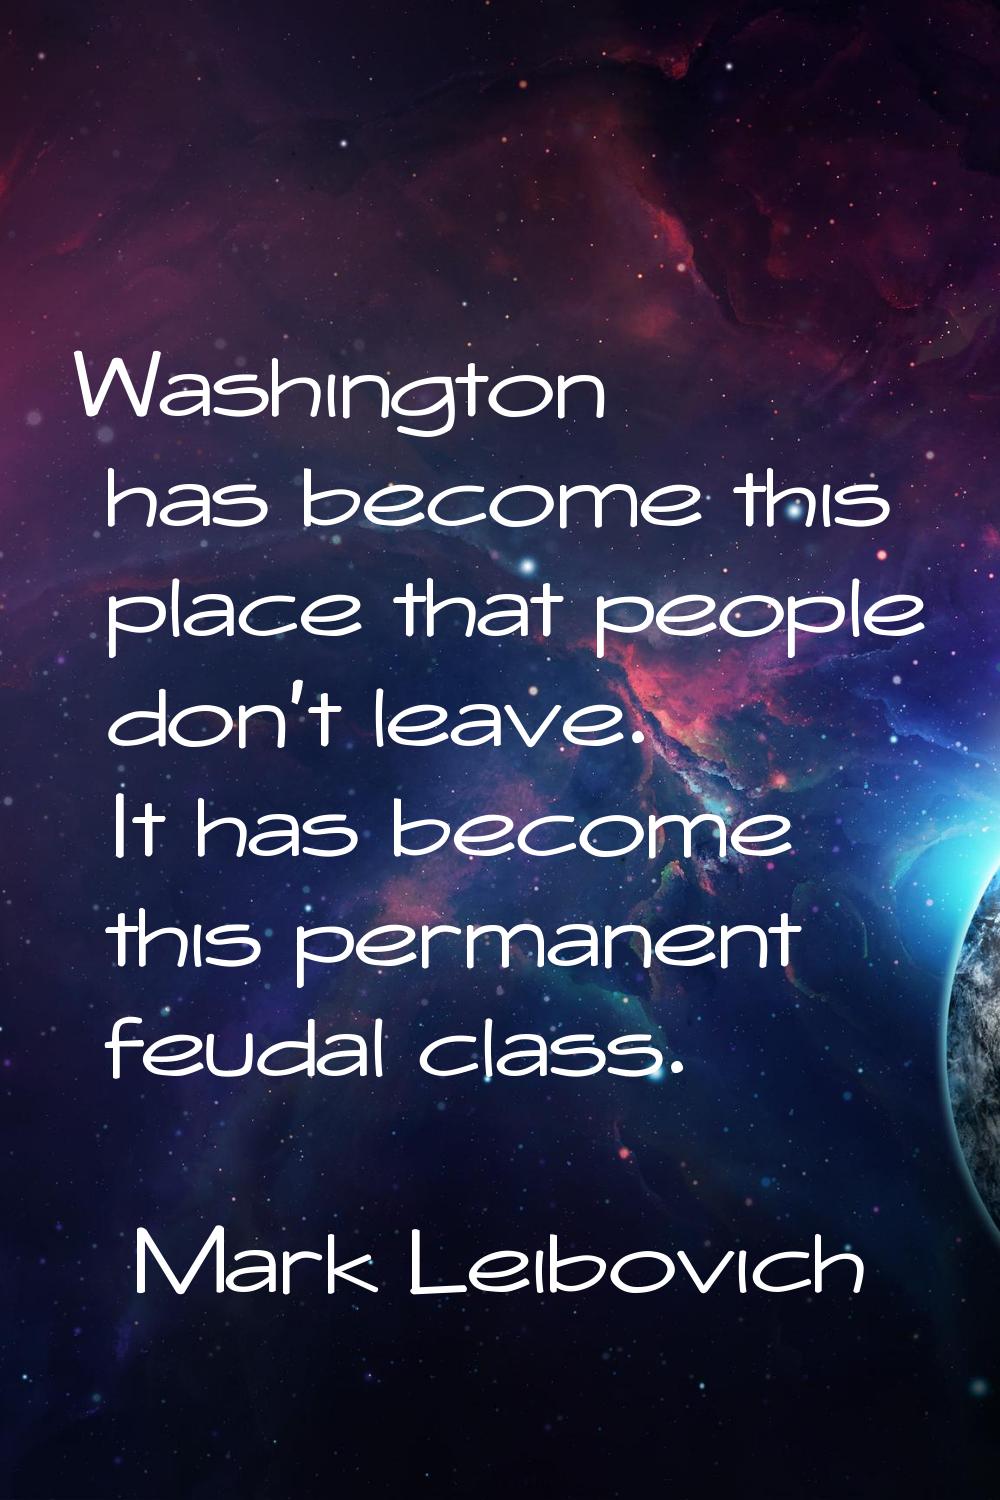 Washington has become this place that people don't leave. It has become this permanent feudal class